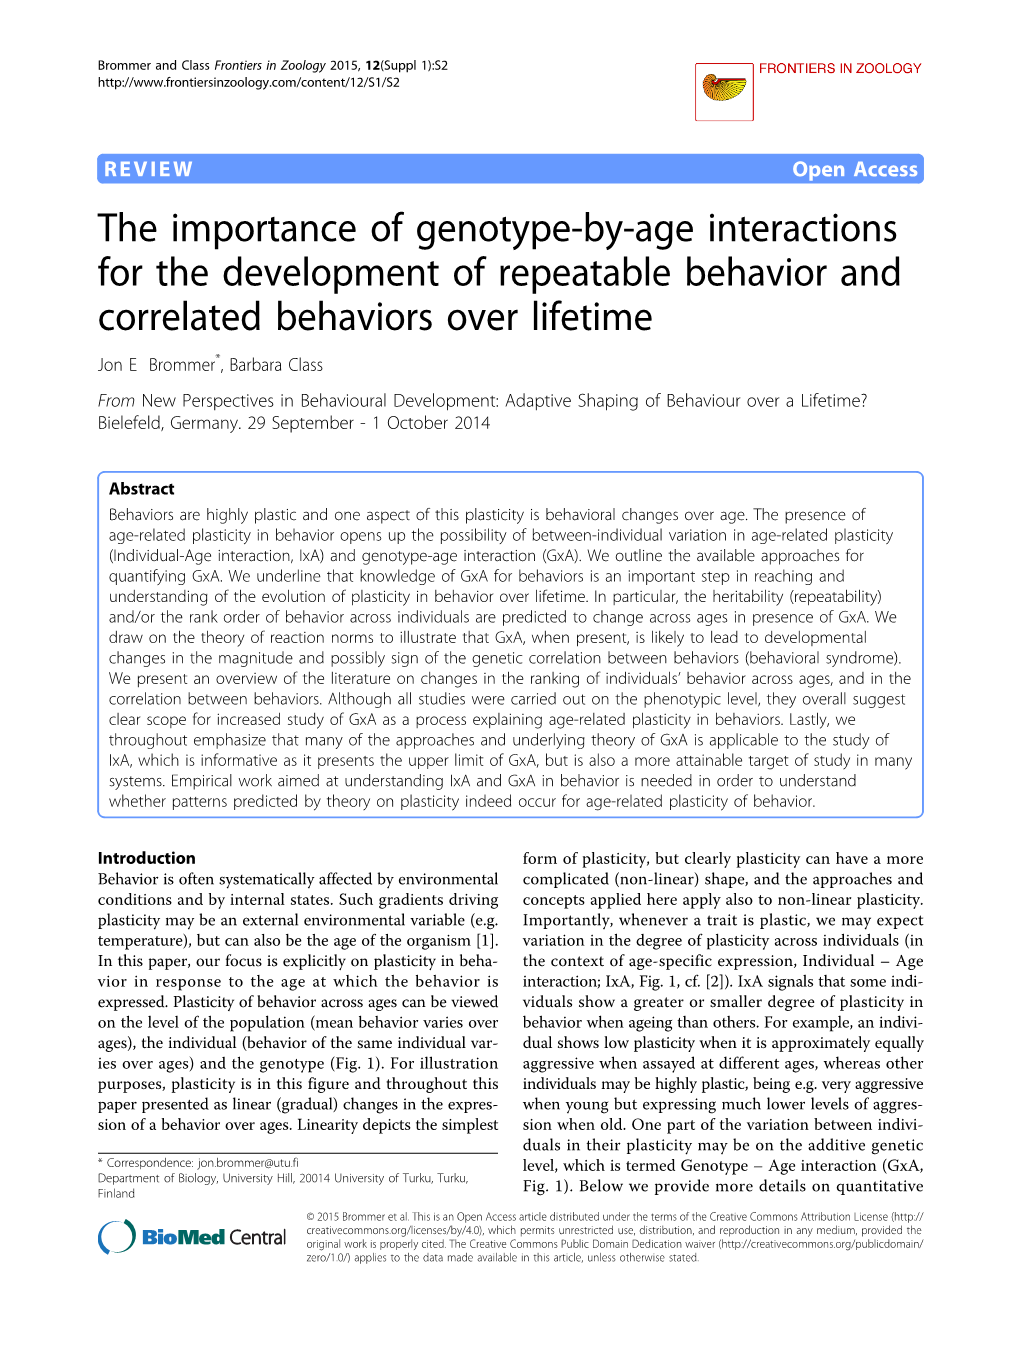 The Importance of Genotype-By-Age Interactions